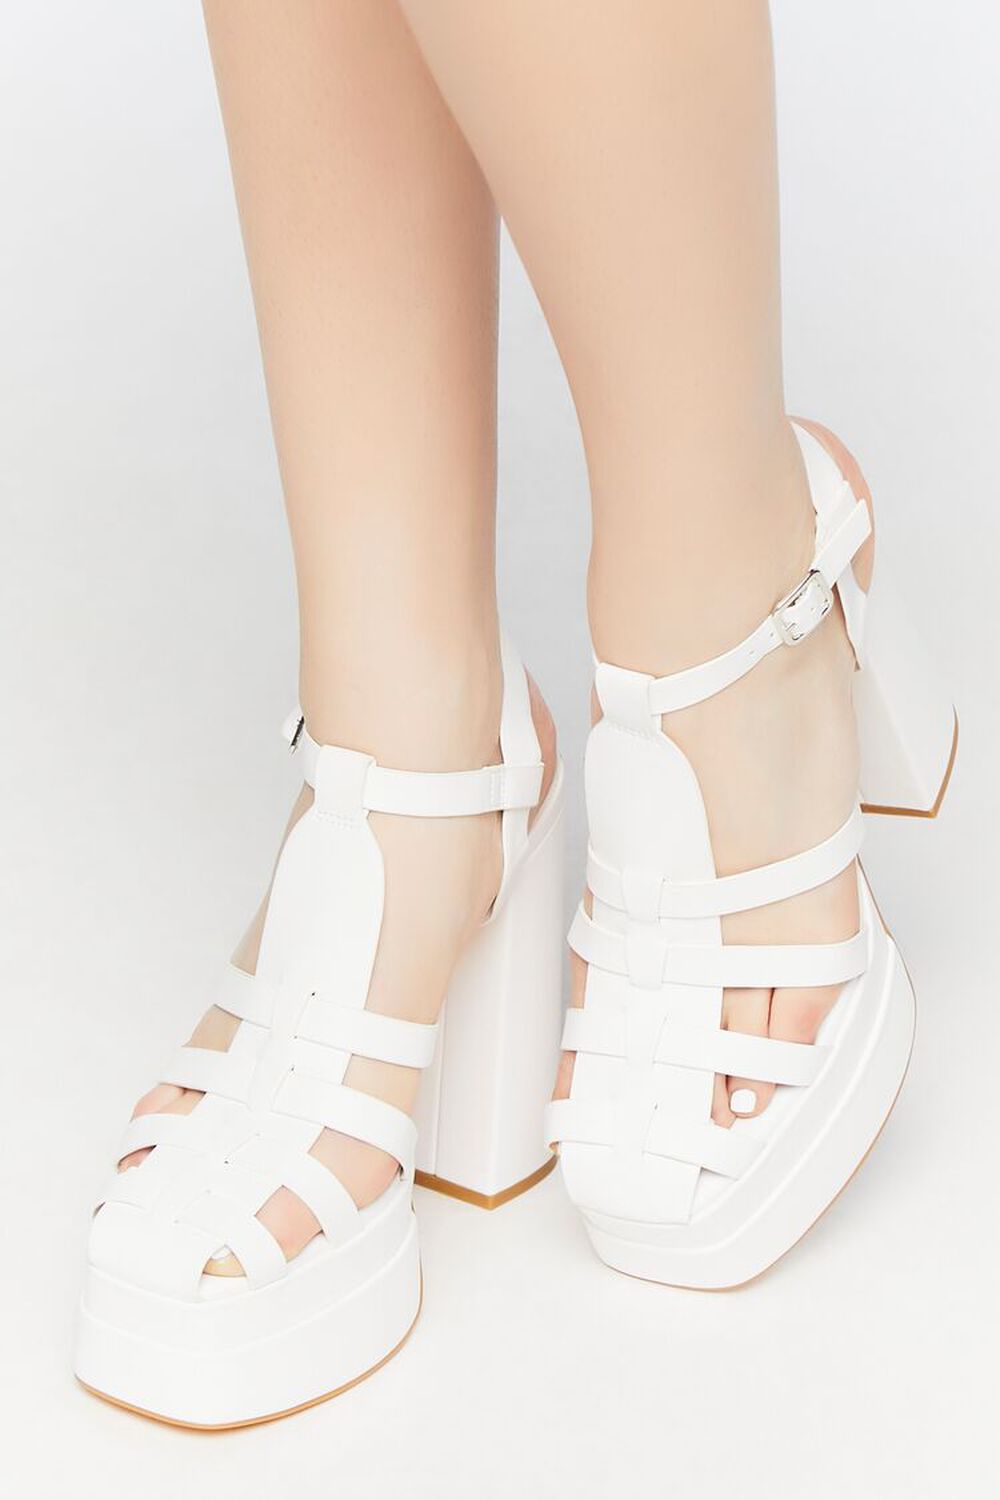 WHITE Faux Leather Caged Platform Heels, image 1